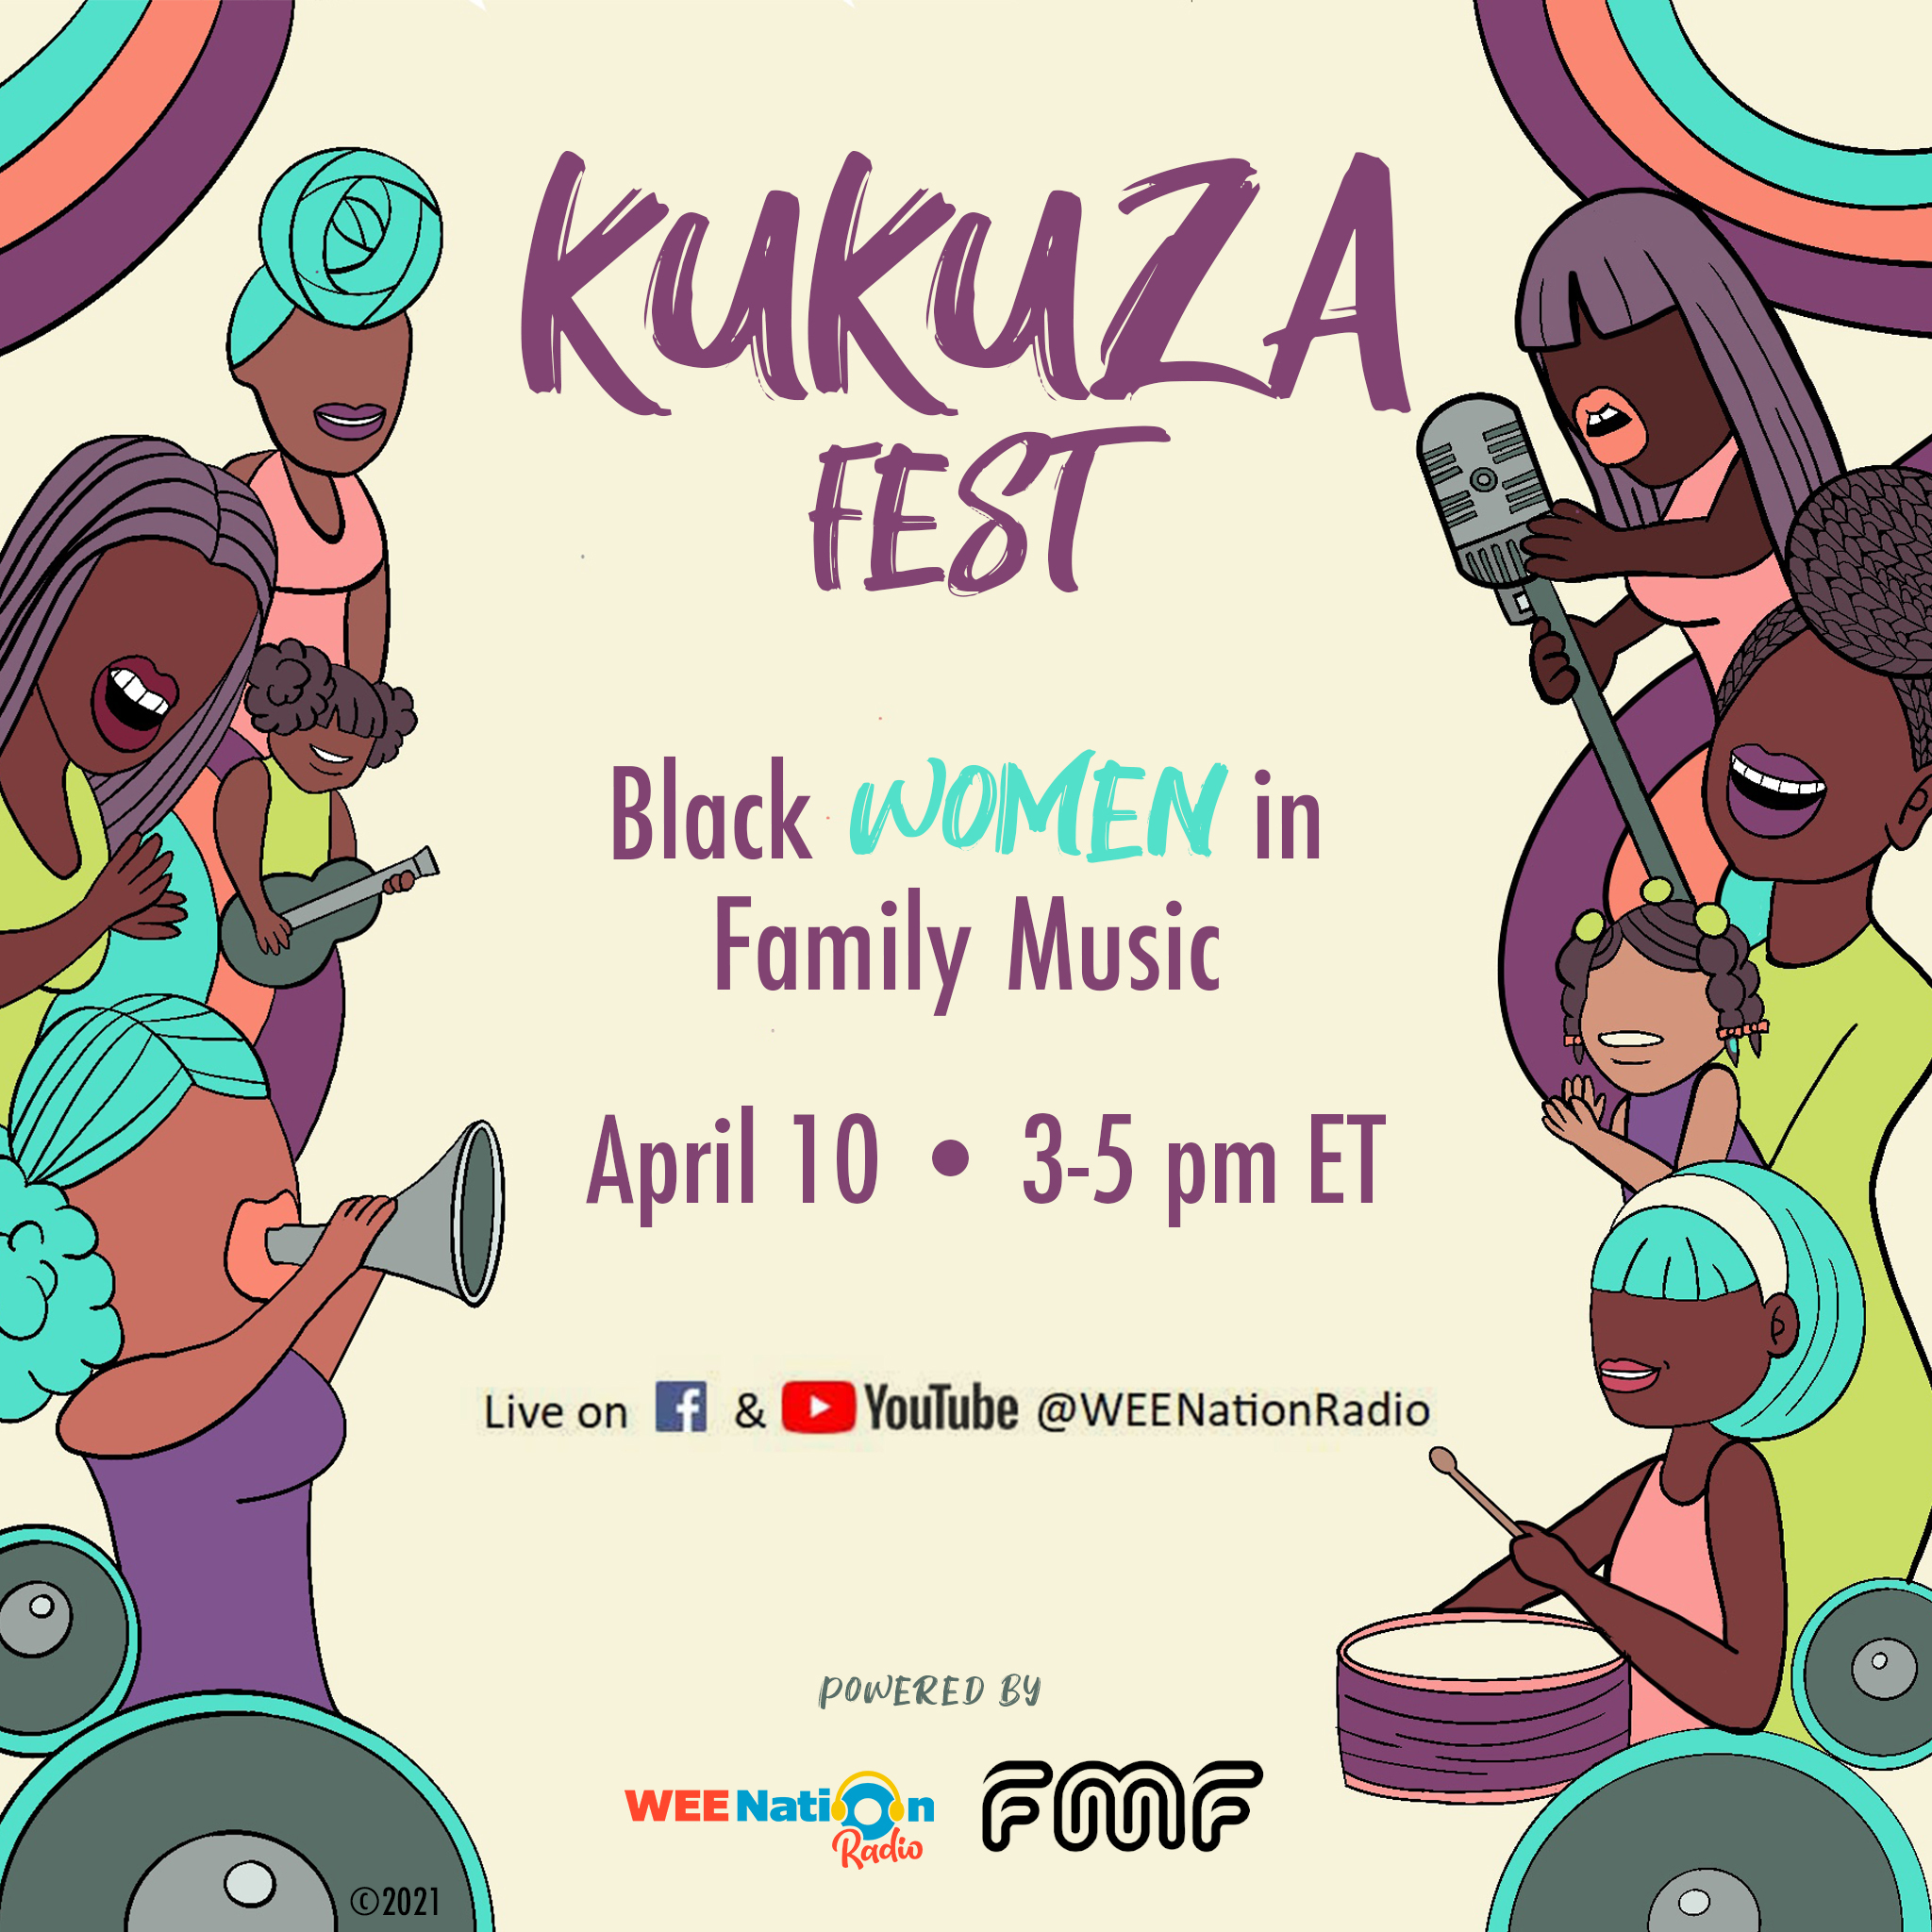 Kukuza Fest: A Salute to Women to Feature Black Women in Family Music on April 10